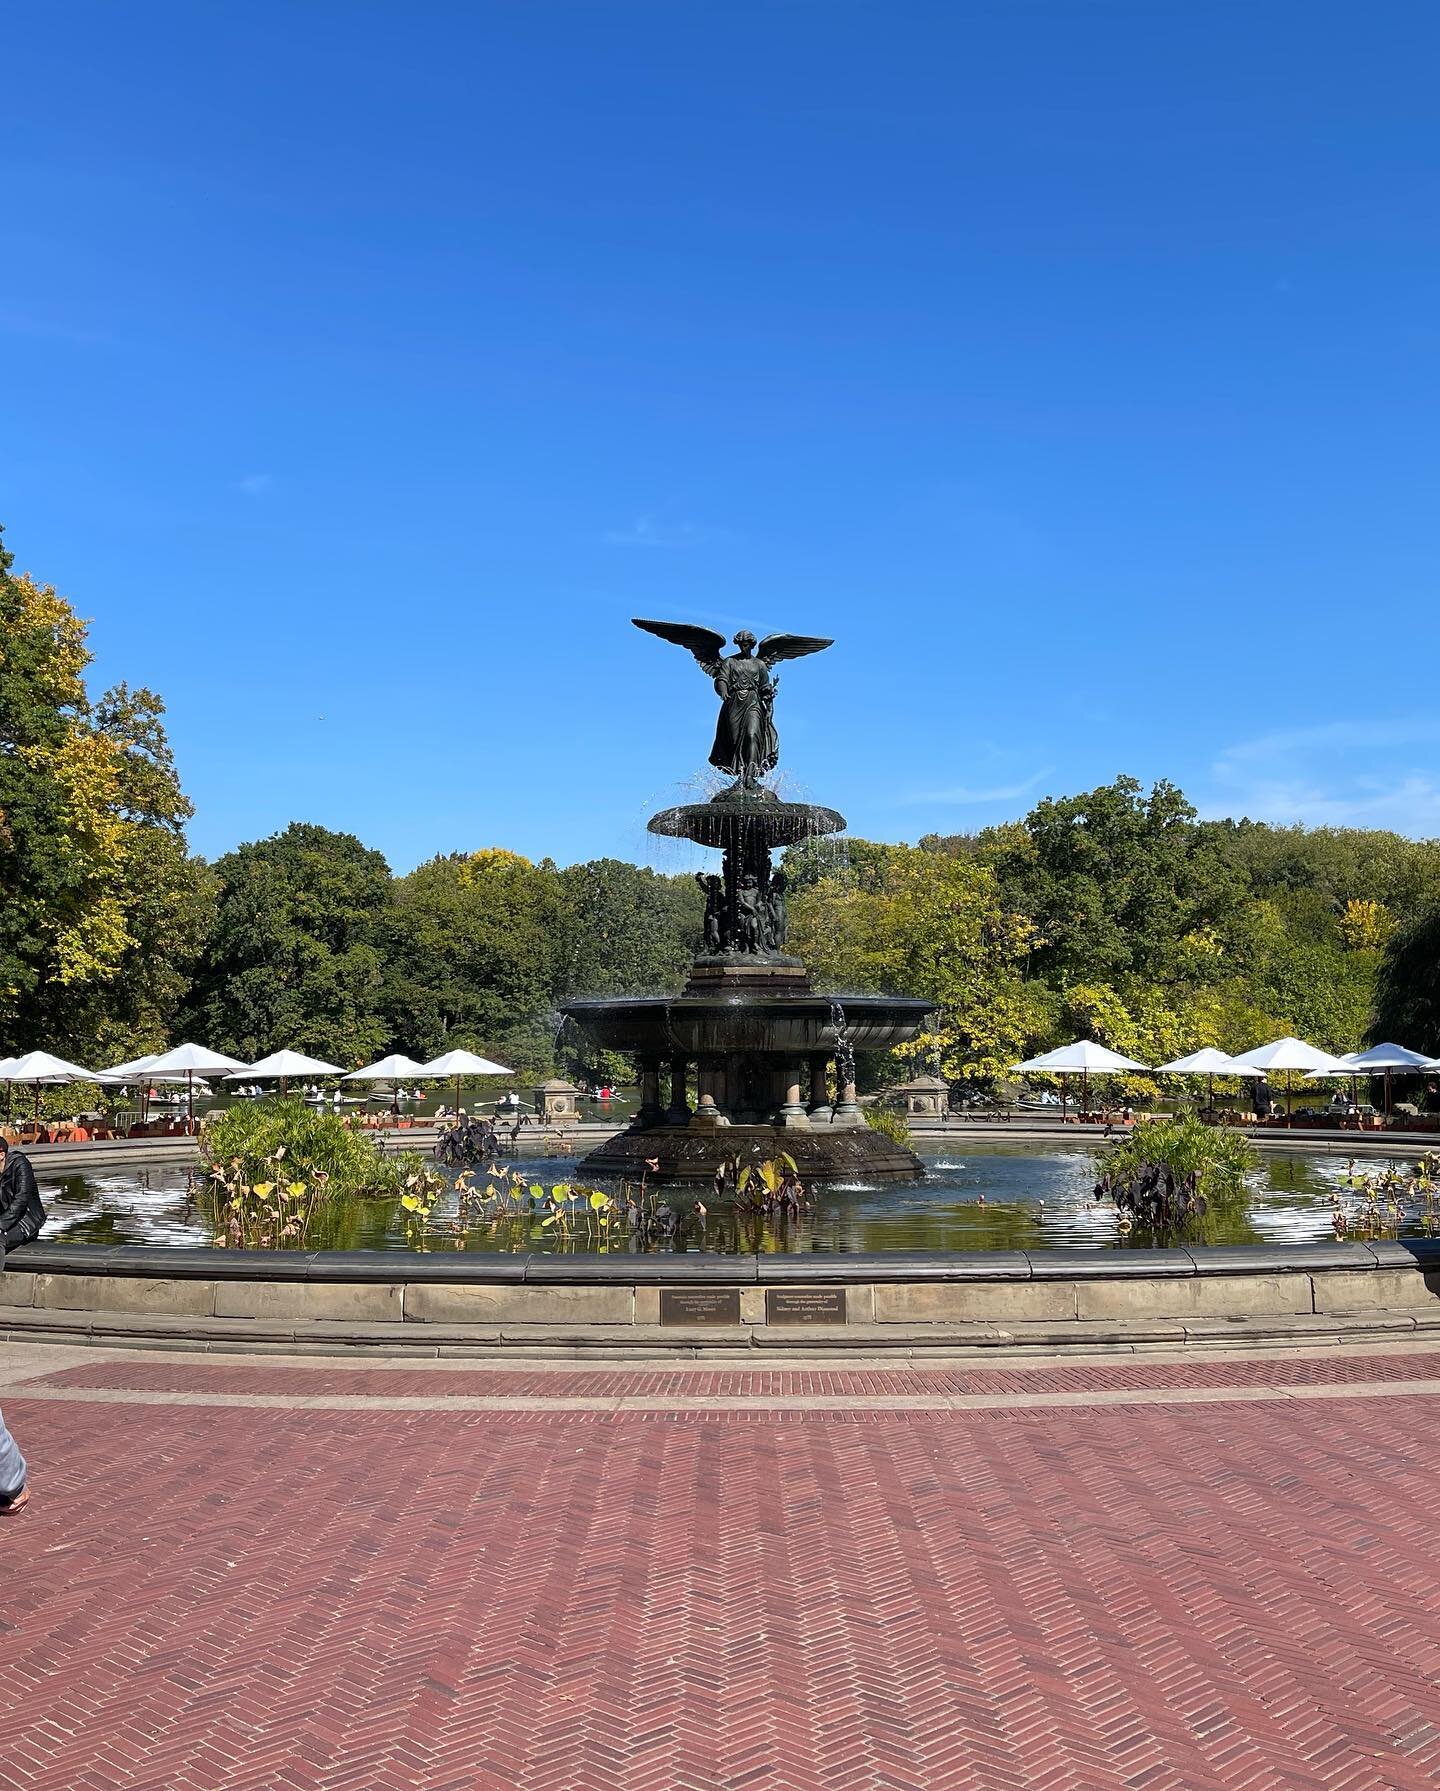 On Tuesday&rsquo;s we would rather be outside @centralparknyc 
.
.
.
.
Fall Luncheon with @centralparknycwomenscommittee 
#picnic #centralpark #fall #luncheon #events #wedontduckaround #canardinc